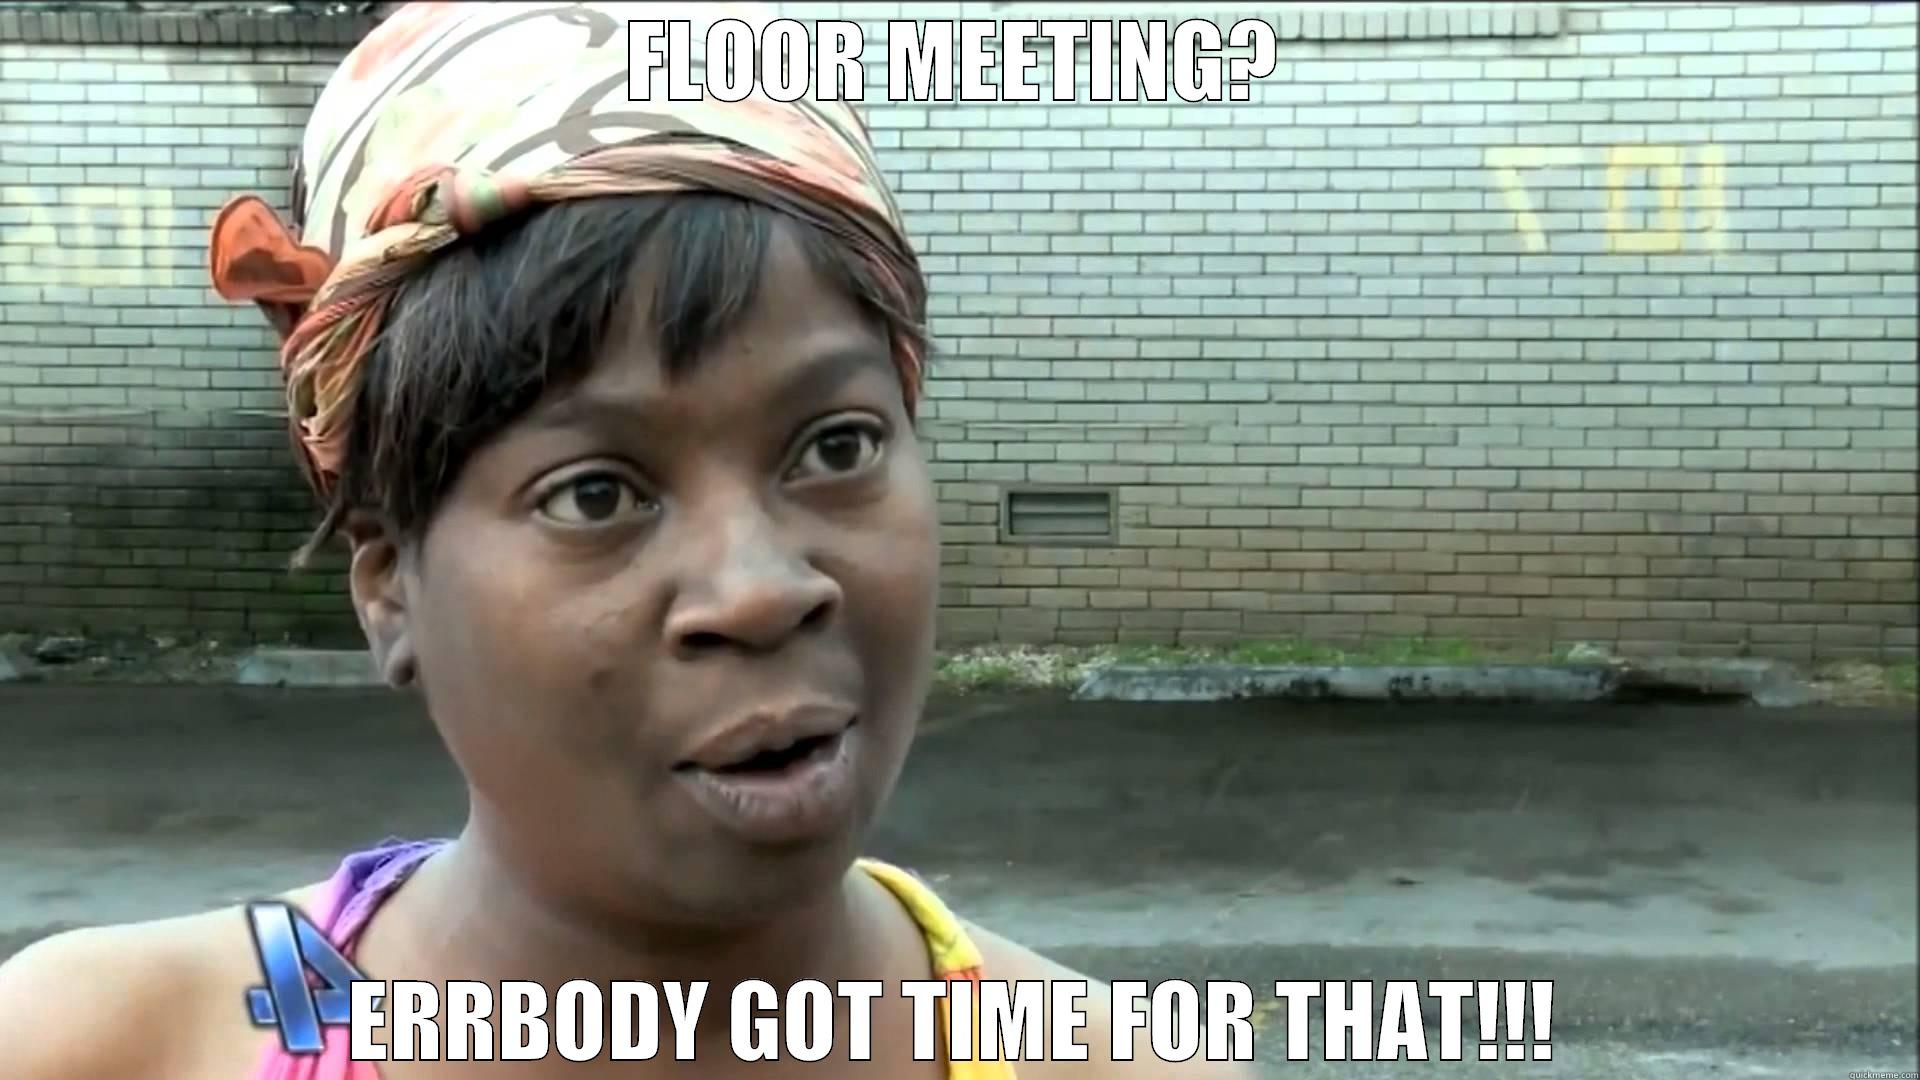 FLOOR MEETING? ERRBODY GOT TIME FOR THAT!!! Misc